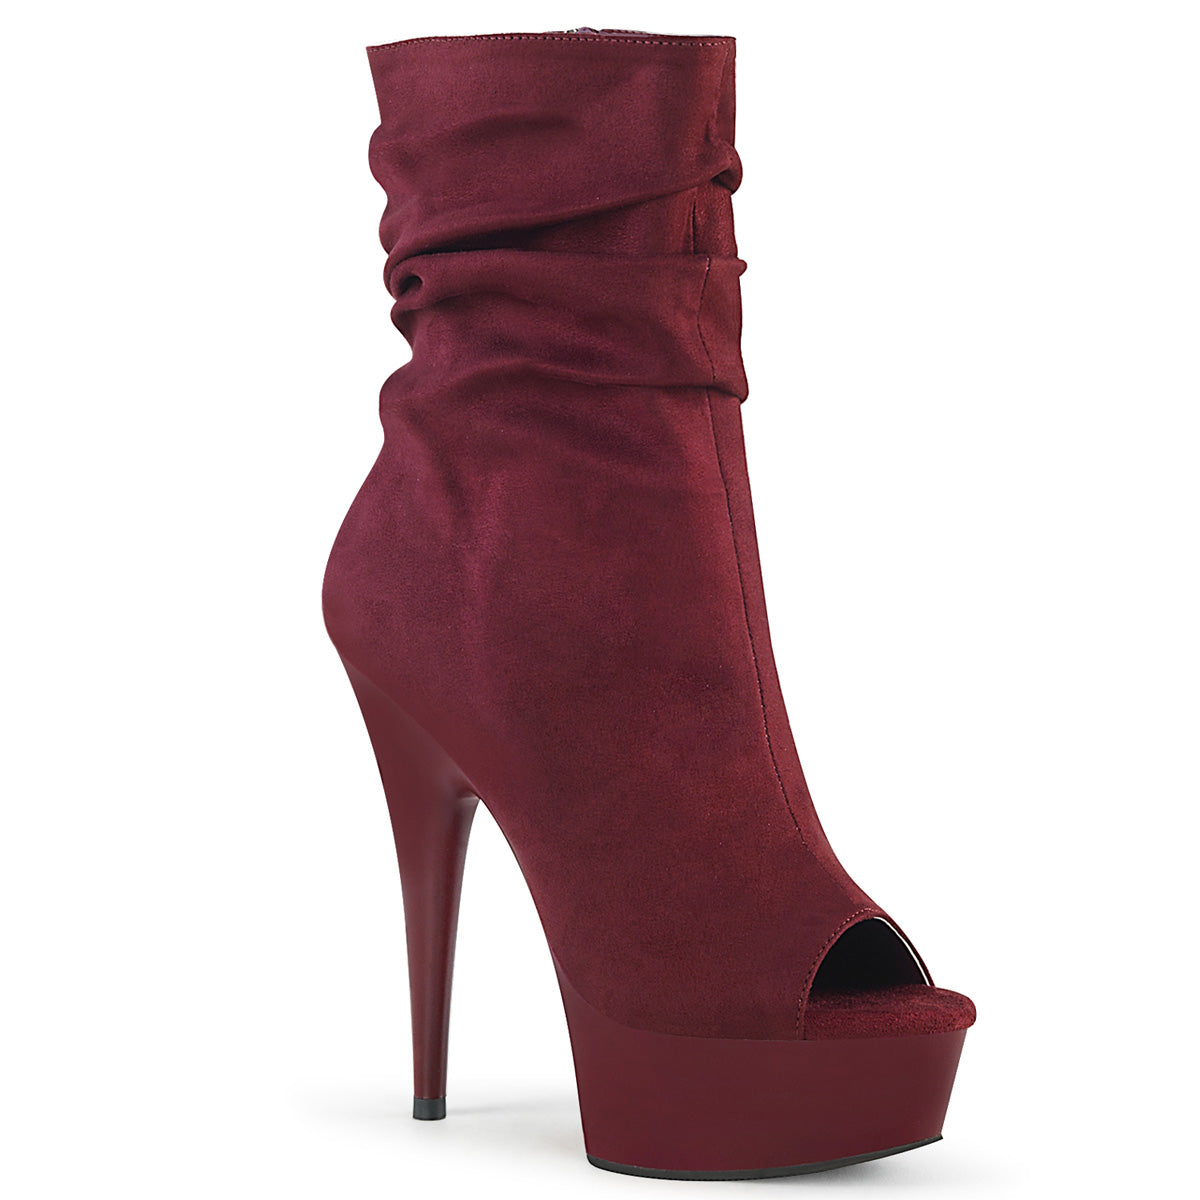 Pleaser Womens Ankle Boots DELIGHT-1031 Burgundy Faux Suede/Burgundy Matte